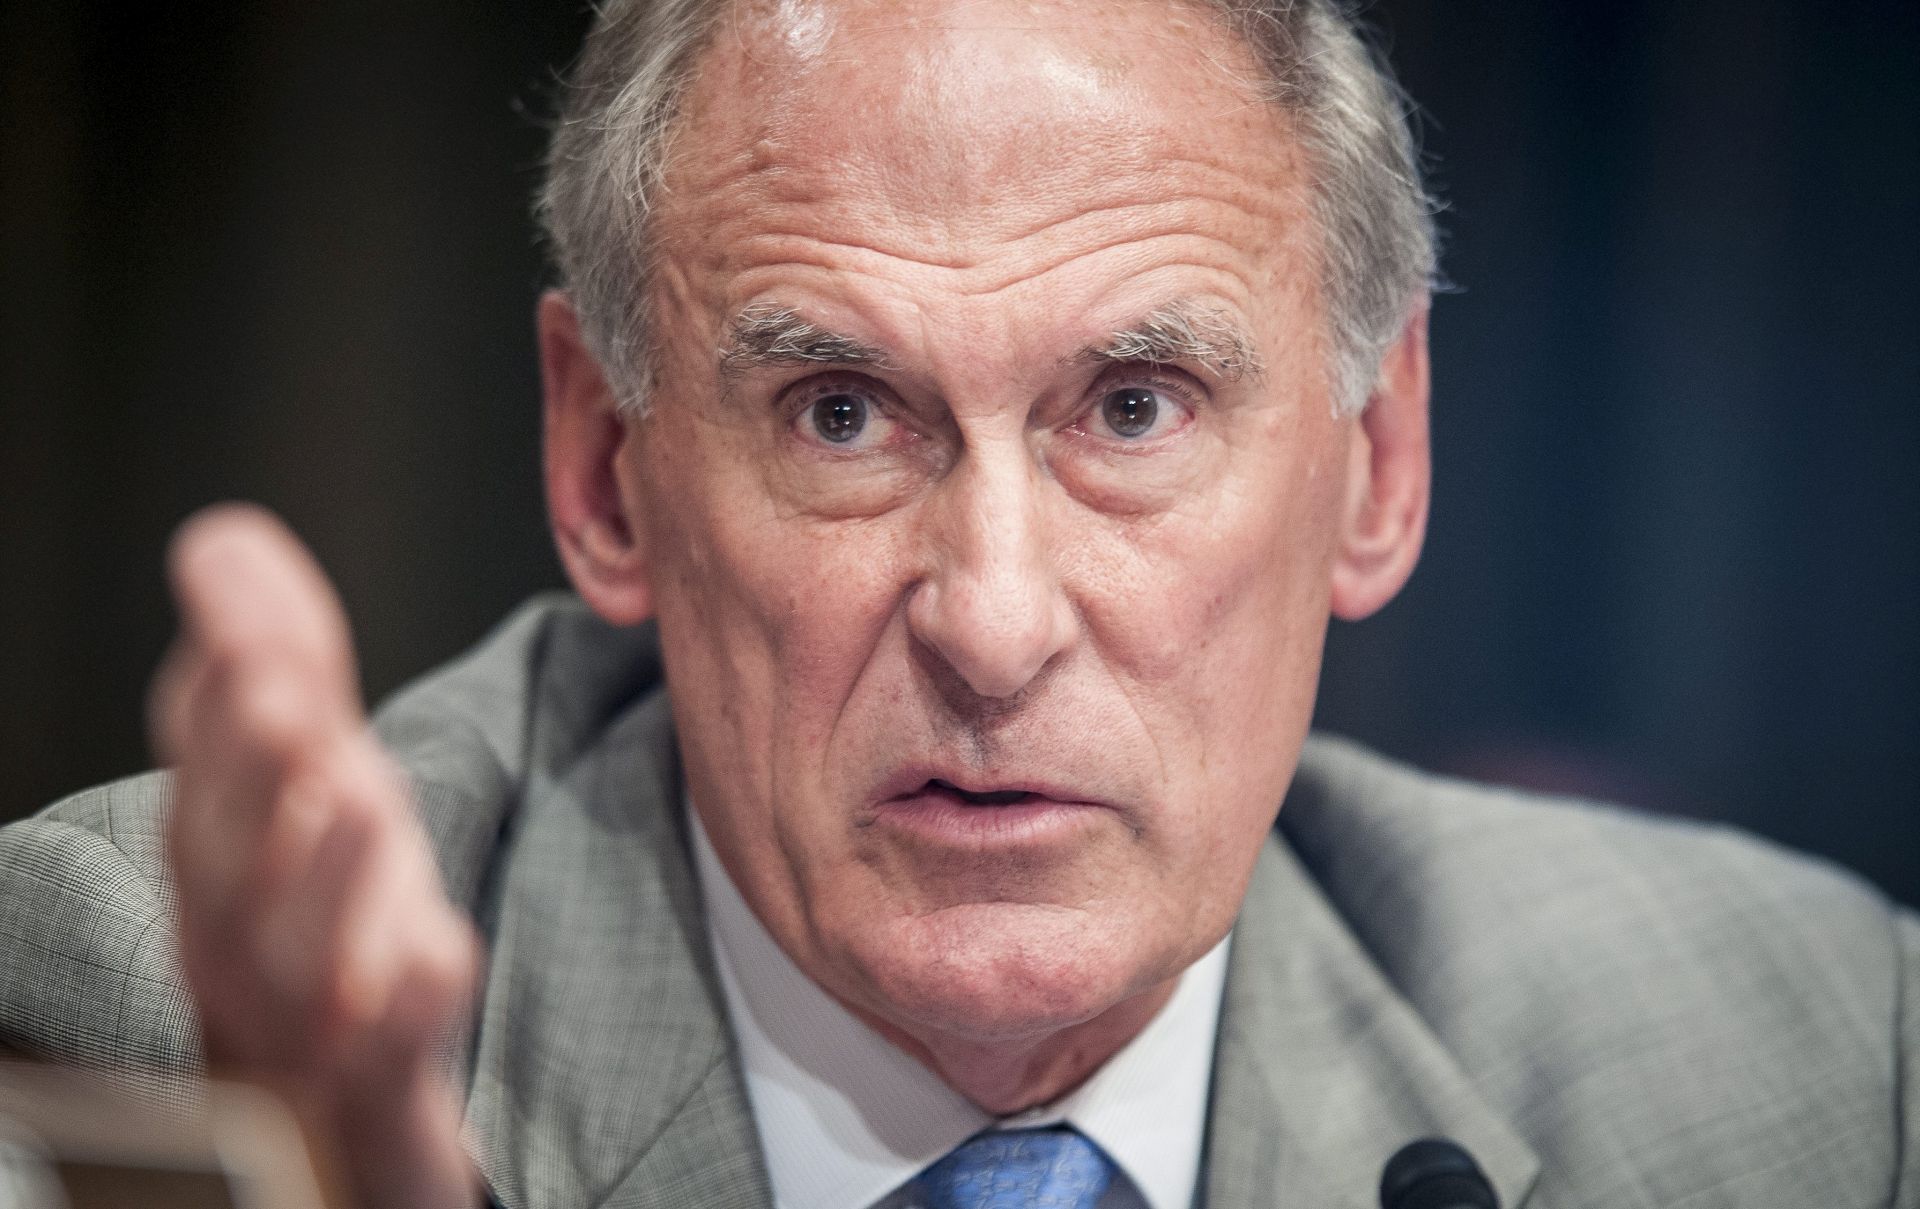 epa05700867 (FILE) - Indiana Senator Dan Coats attends a Senate Appropriations Committee hearing on Capitol Hill in Washington, DC, USA, 13 June 2012 (reissued 06 January 2017). According to news reports on 05 January 2017, US President-elect Trump is to name Dan Coats as Director of national intelligence.  EPA/PETE MAROVICH